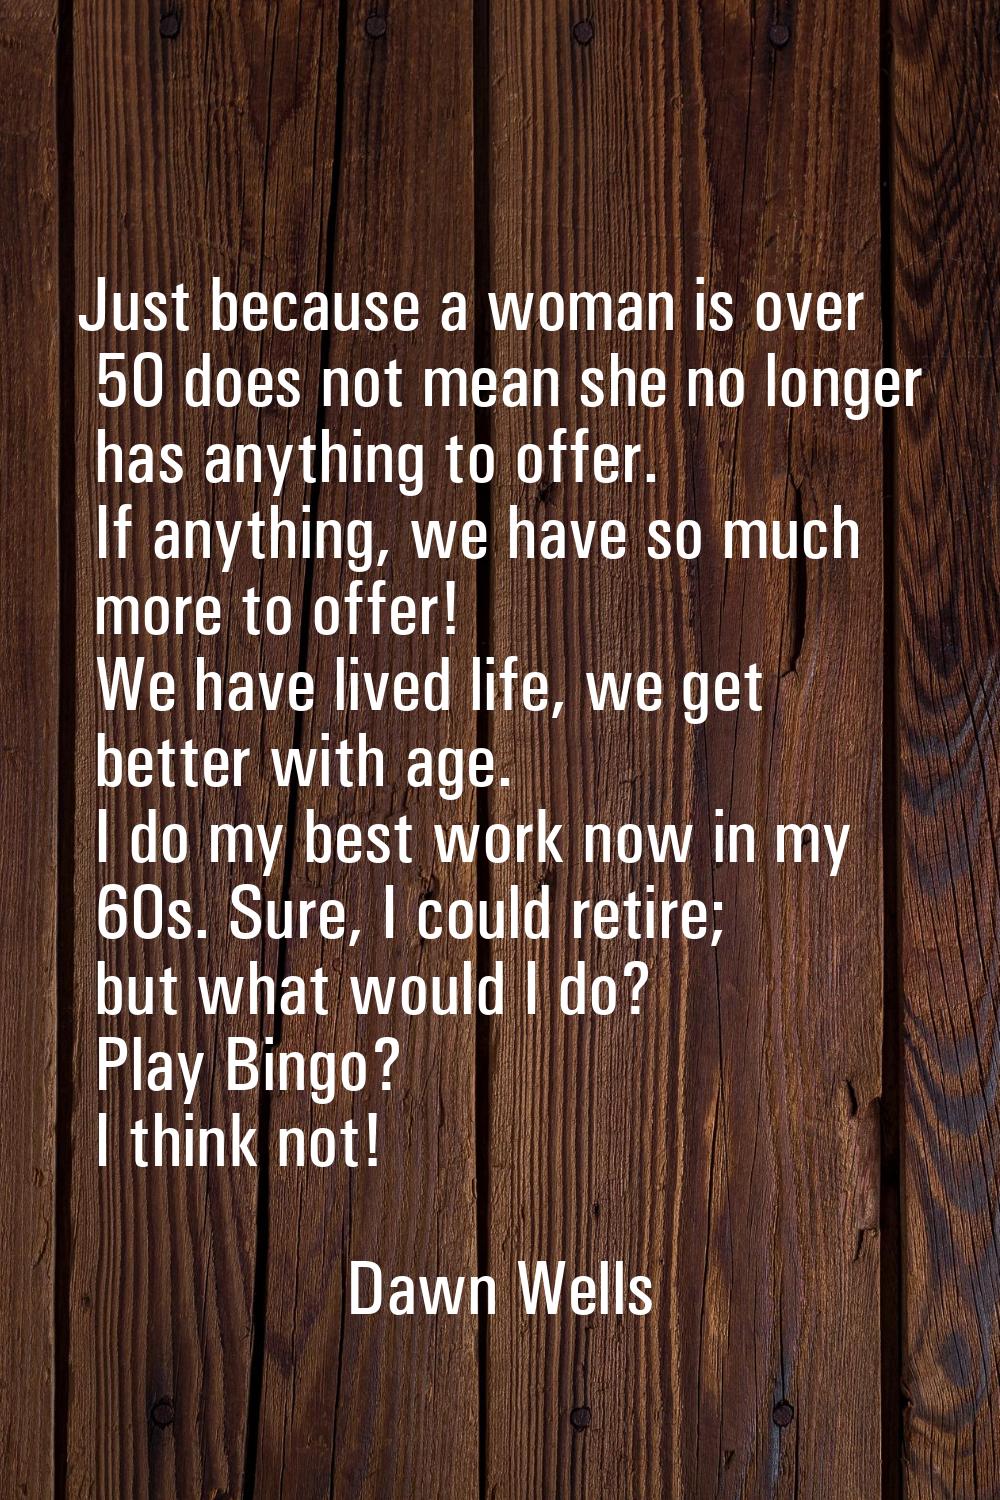 Just because a woman is over 50 does not mean she no longer has anything to offer. If anything, we 